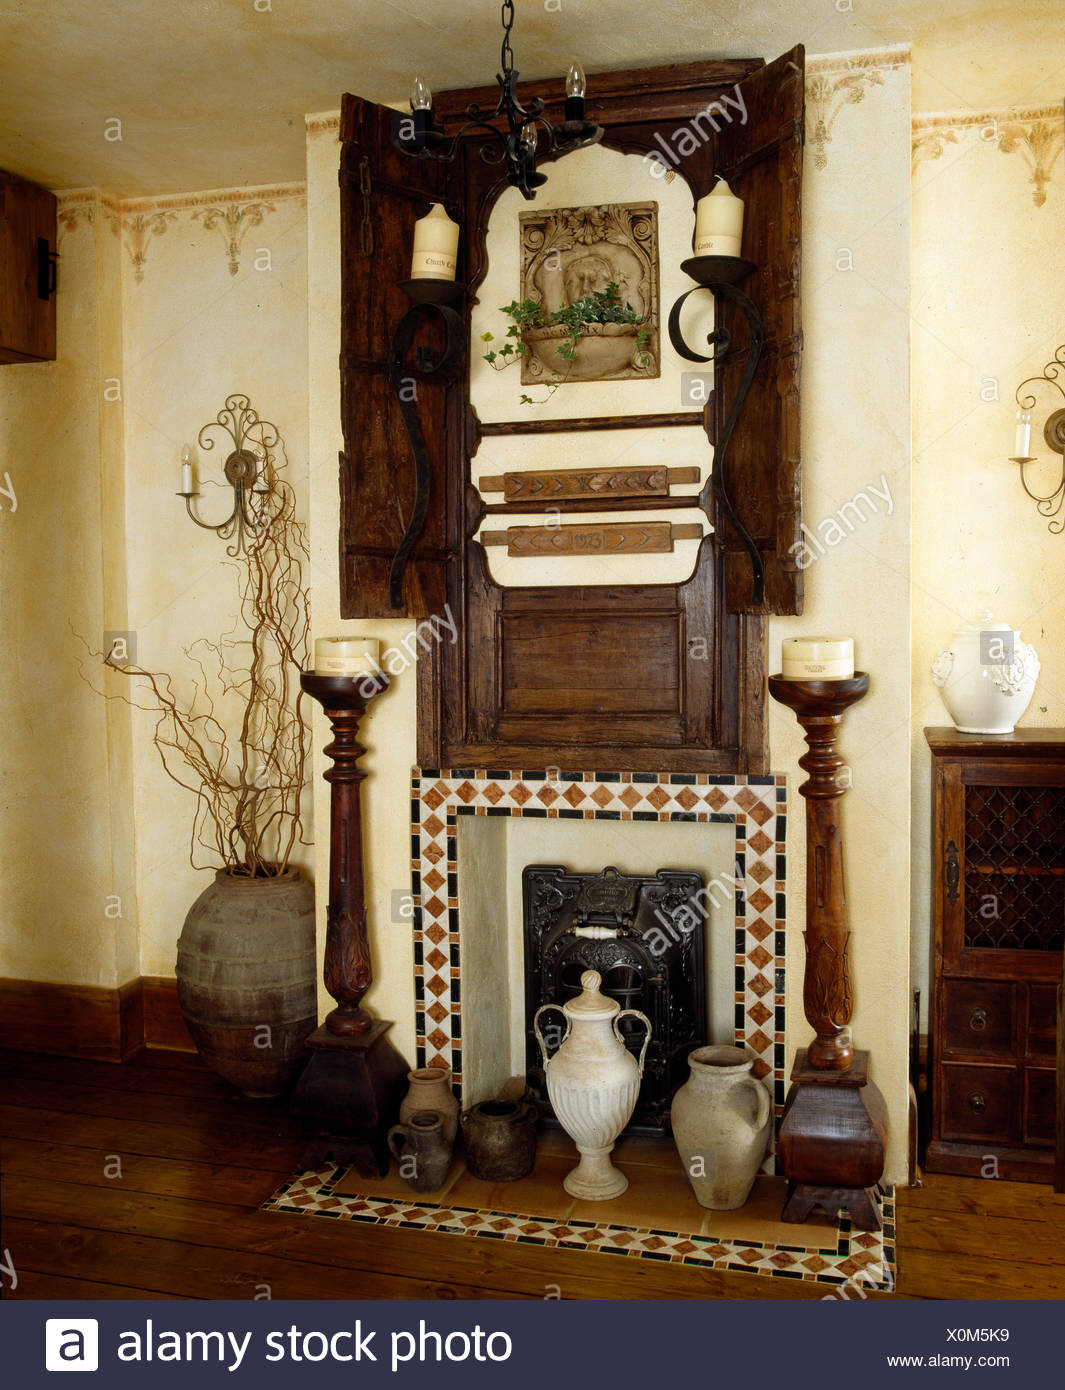 fireplace with old wooden carving above and tall wooden candle holders either side X0M5K9